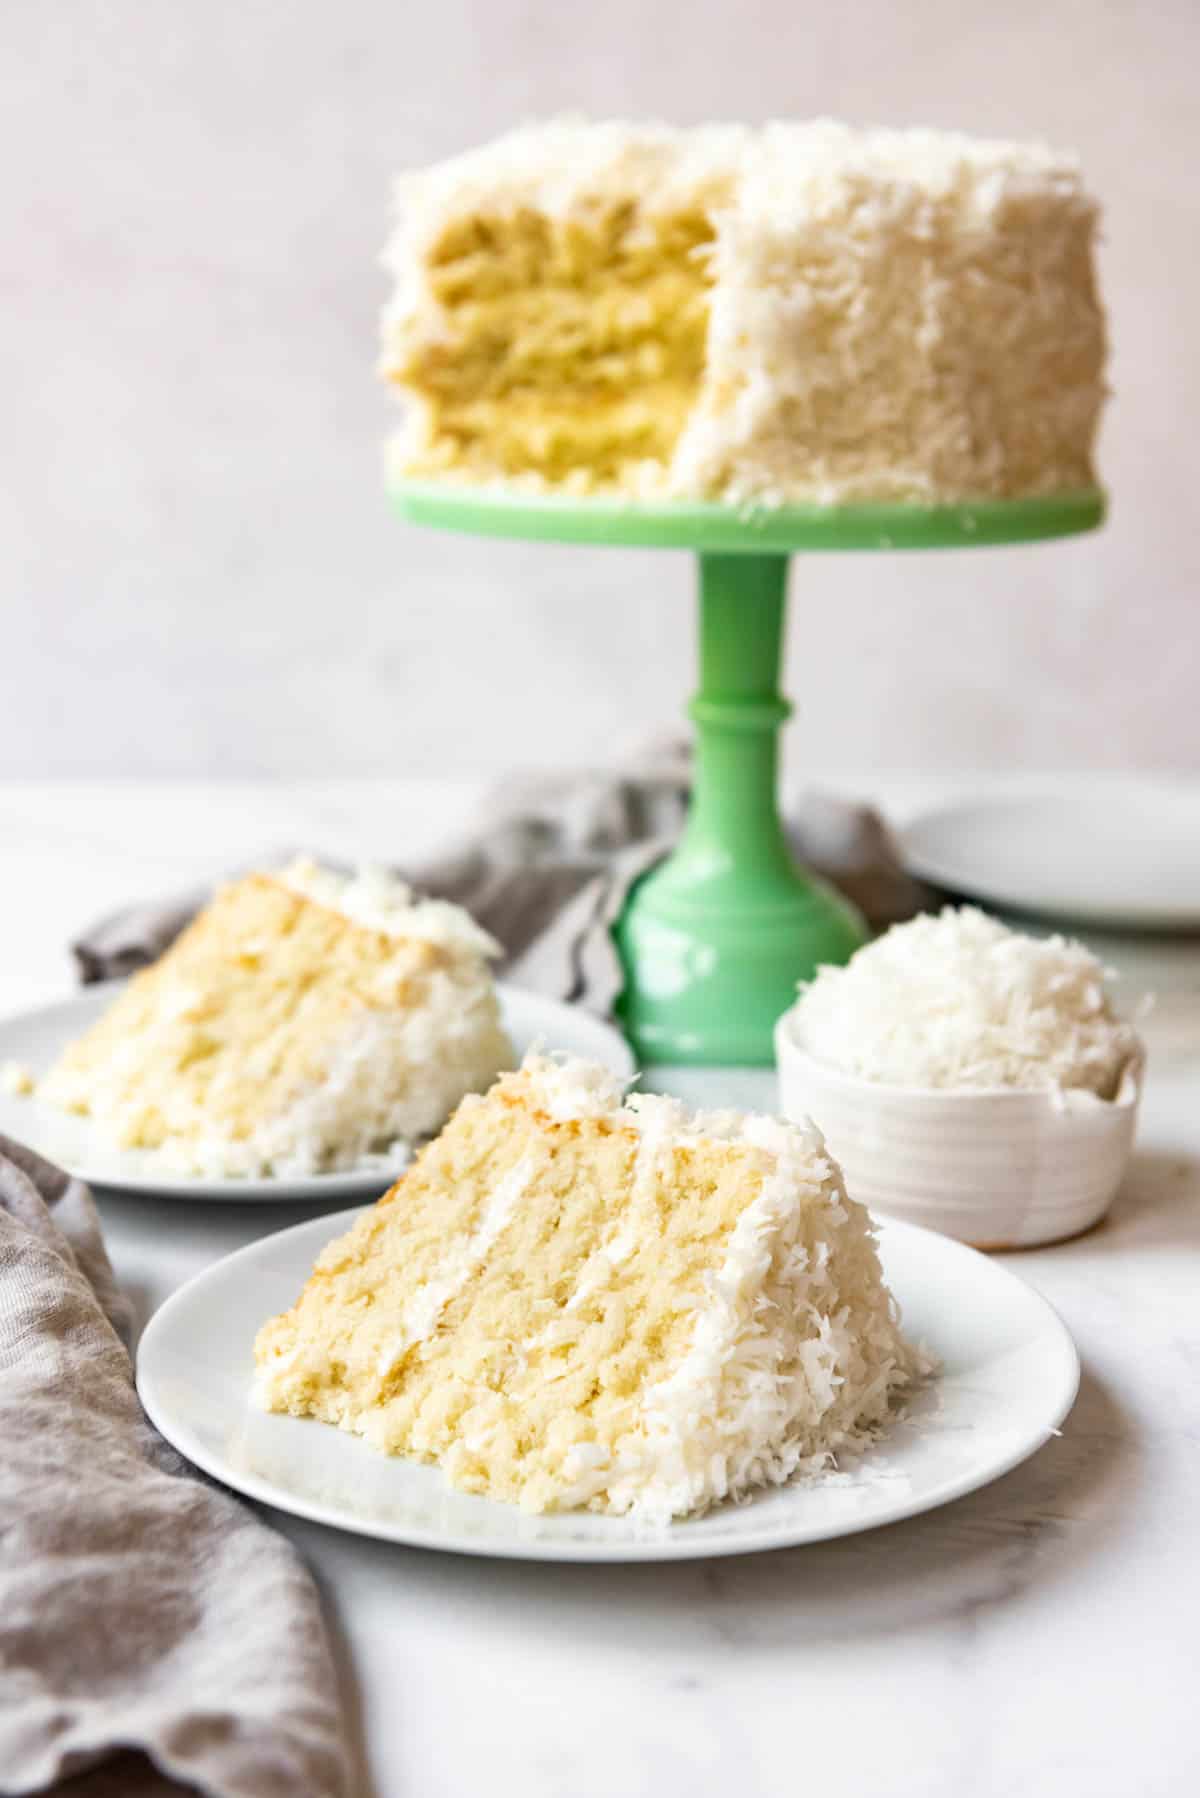 Two plates with slices of Coconut cake on them next to a green cake stand with the rest of the coconut cake on it.